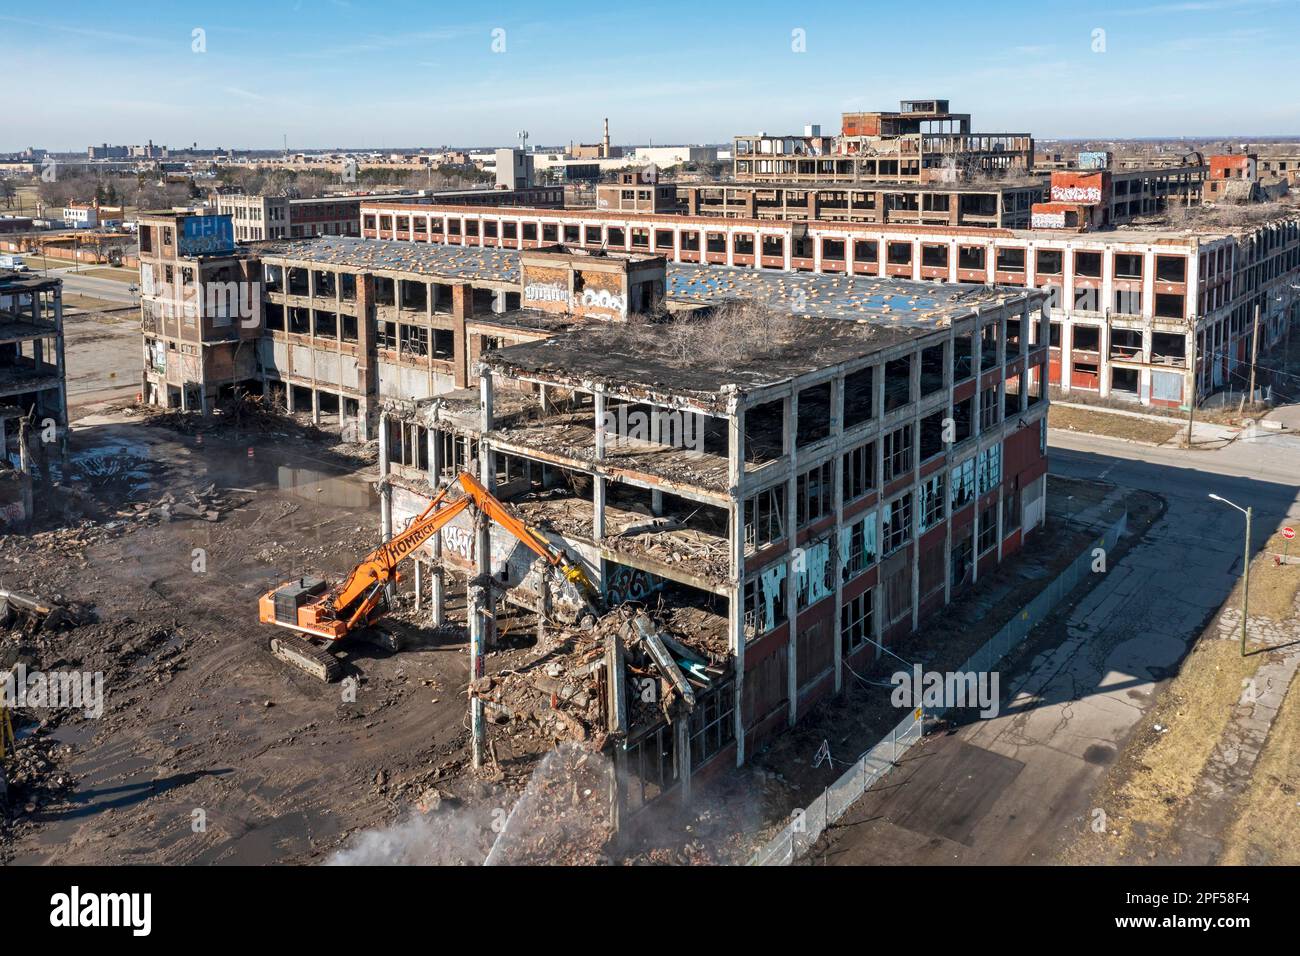 Detroit, Michigan, Demolition of a part of the abandoned Packard auto manufacturing plant. Opened in 1903, the 3.5 million square foot plant employed Stock Photo